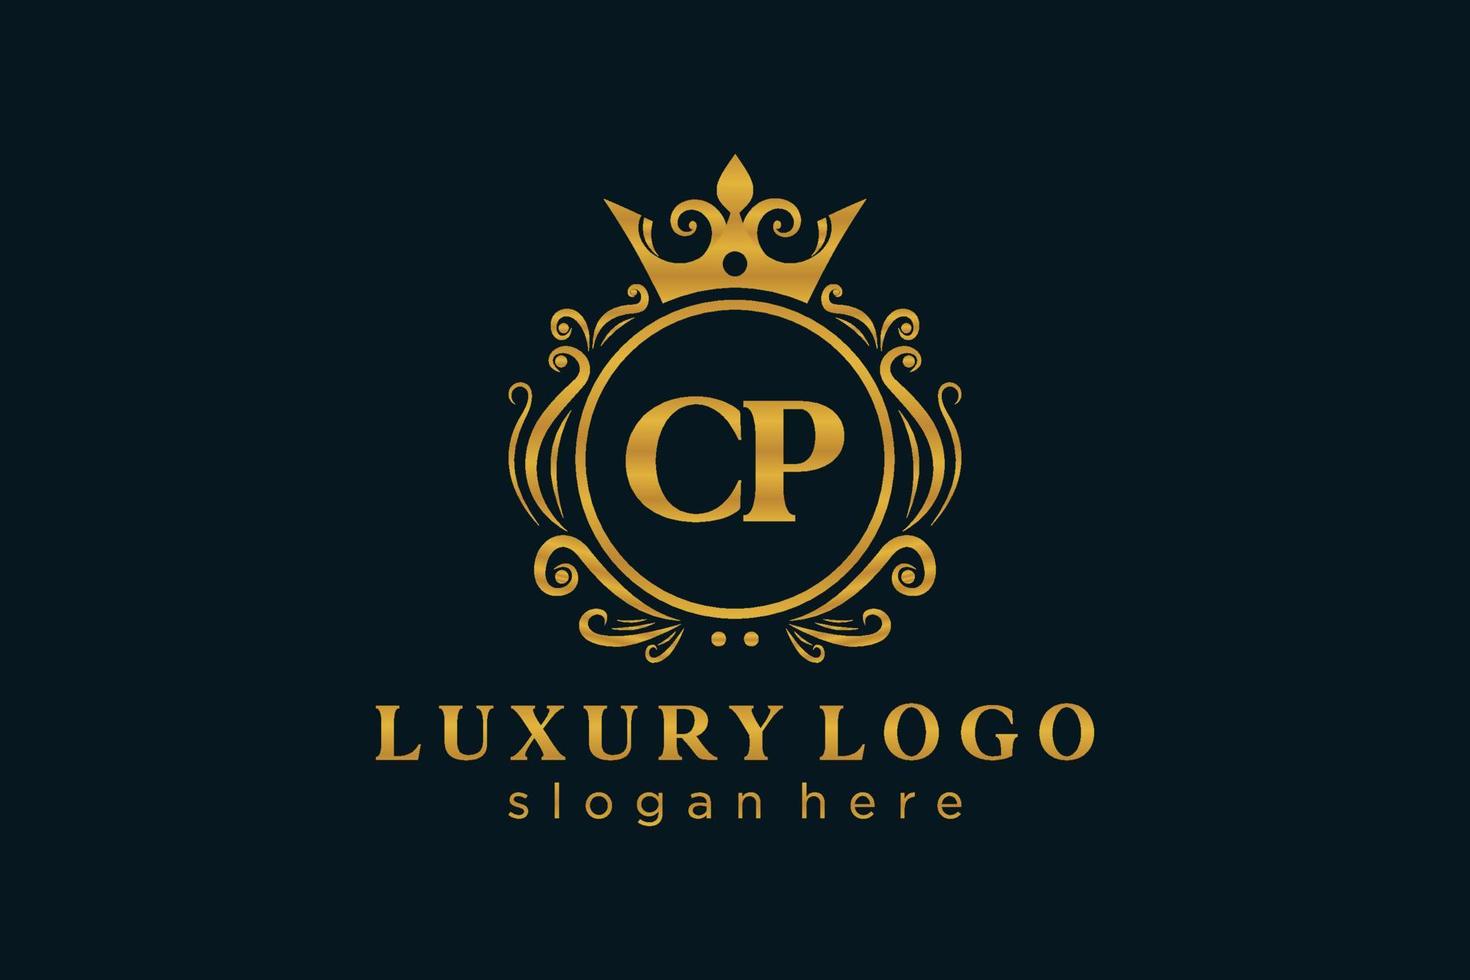 Initial CP Letter Royal Luxury Logo template in vector art for Restaurant, Royalty, Boutique, Cafe, Hotel, Heraldic, Jewelry, Fashion and other vector illustration.